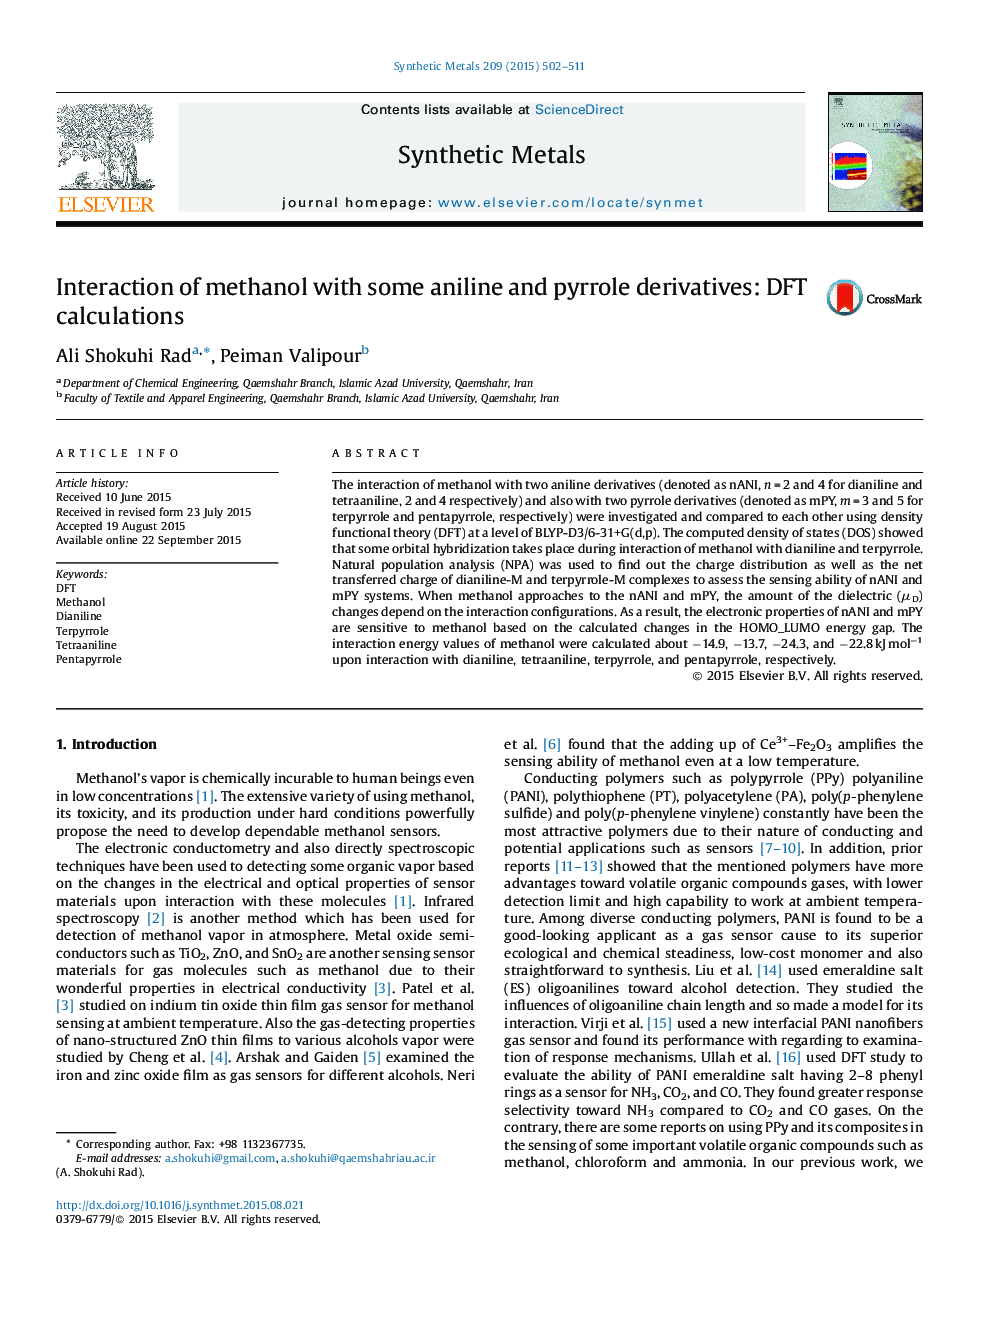 Interaction of methanol with some aniline and pyrrole derivatives: DFT calculations